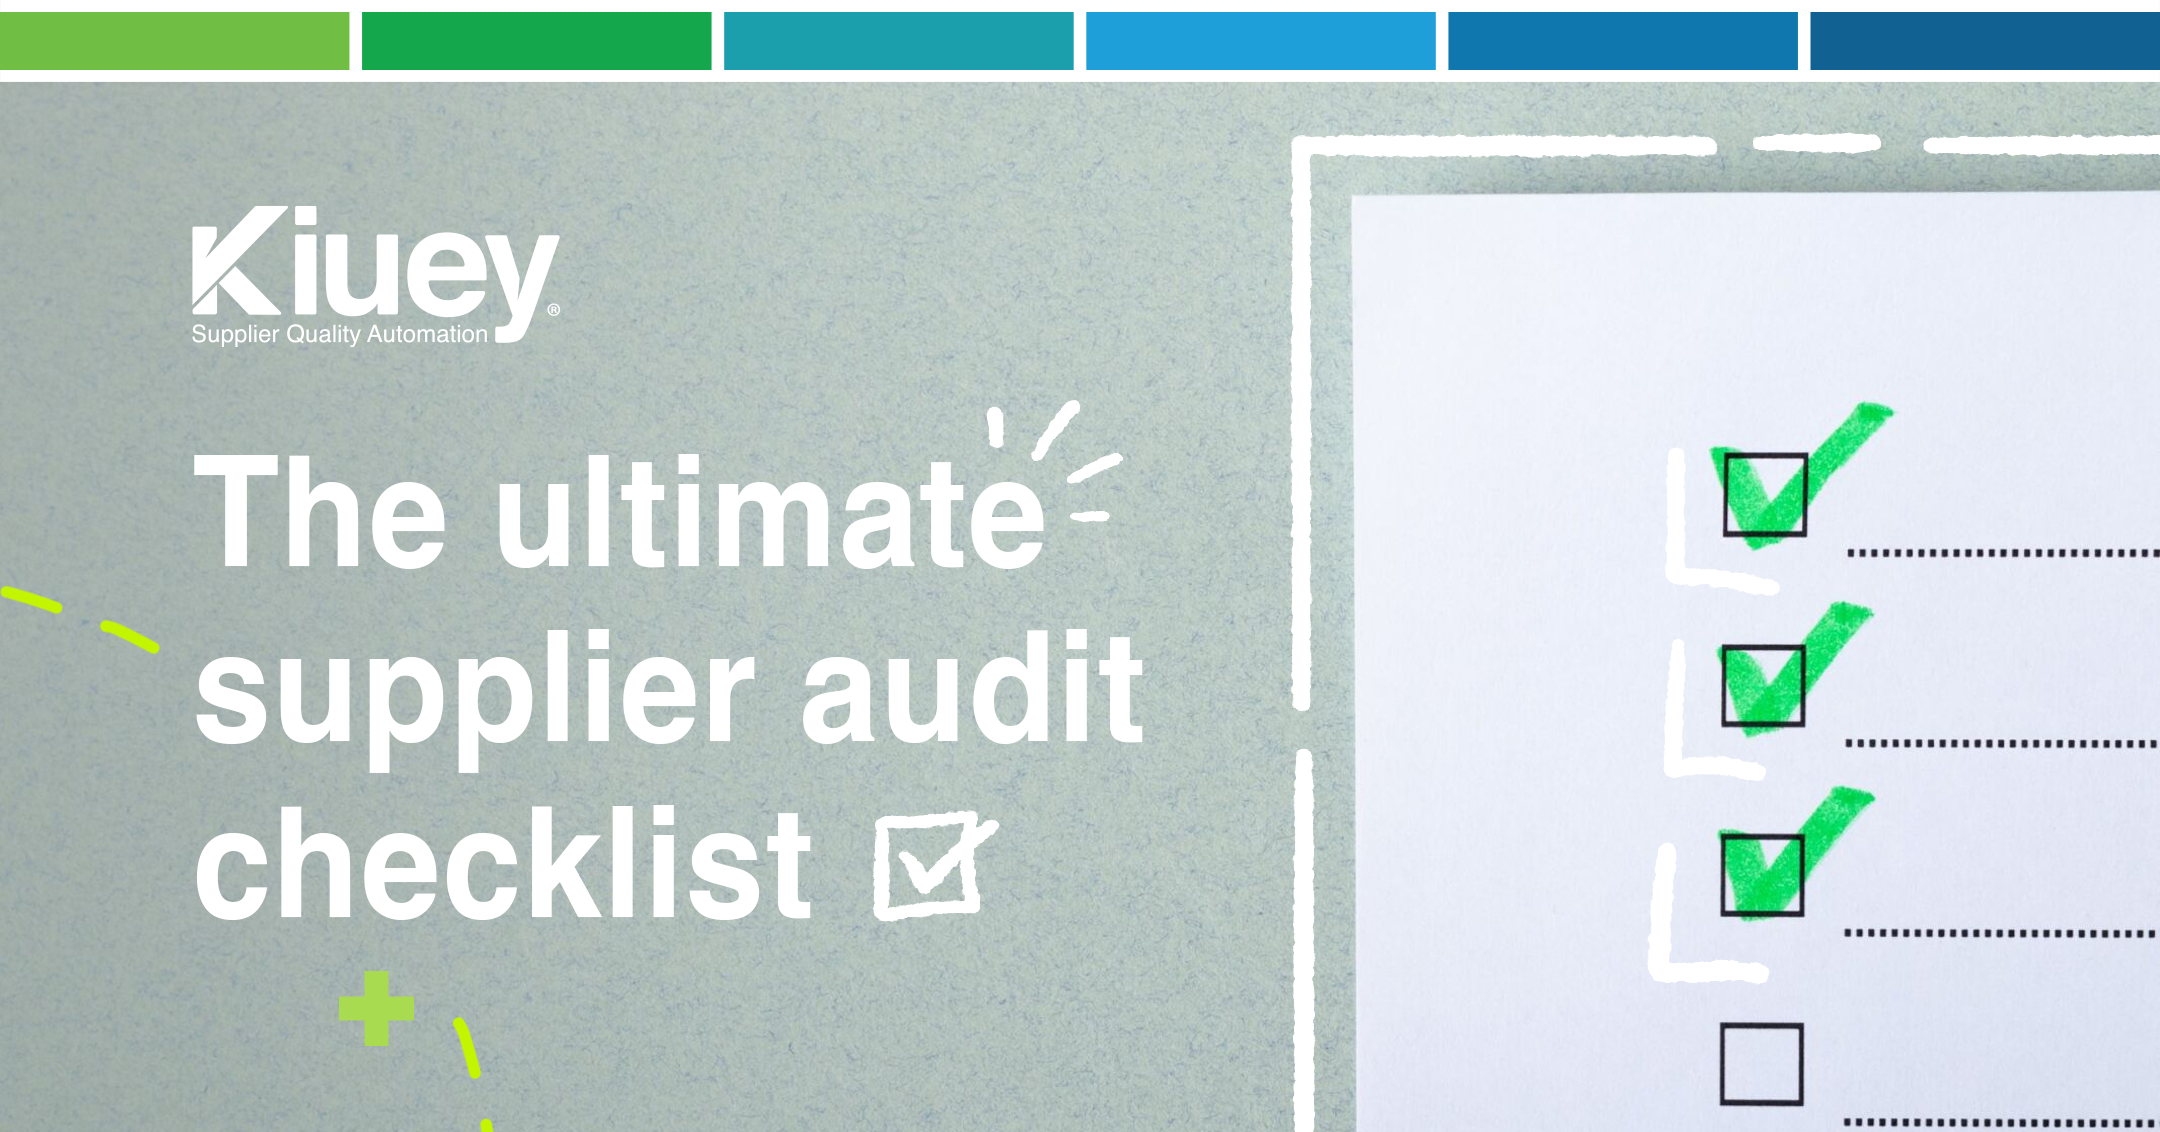 The ultimate supplier audit checklist